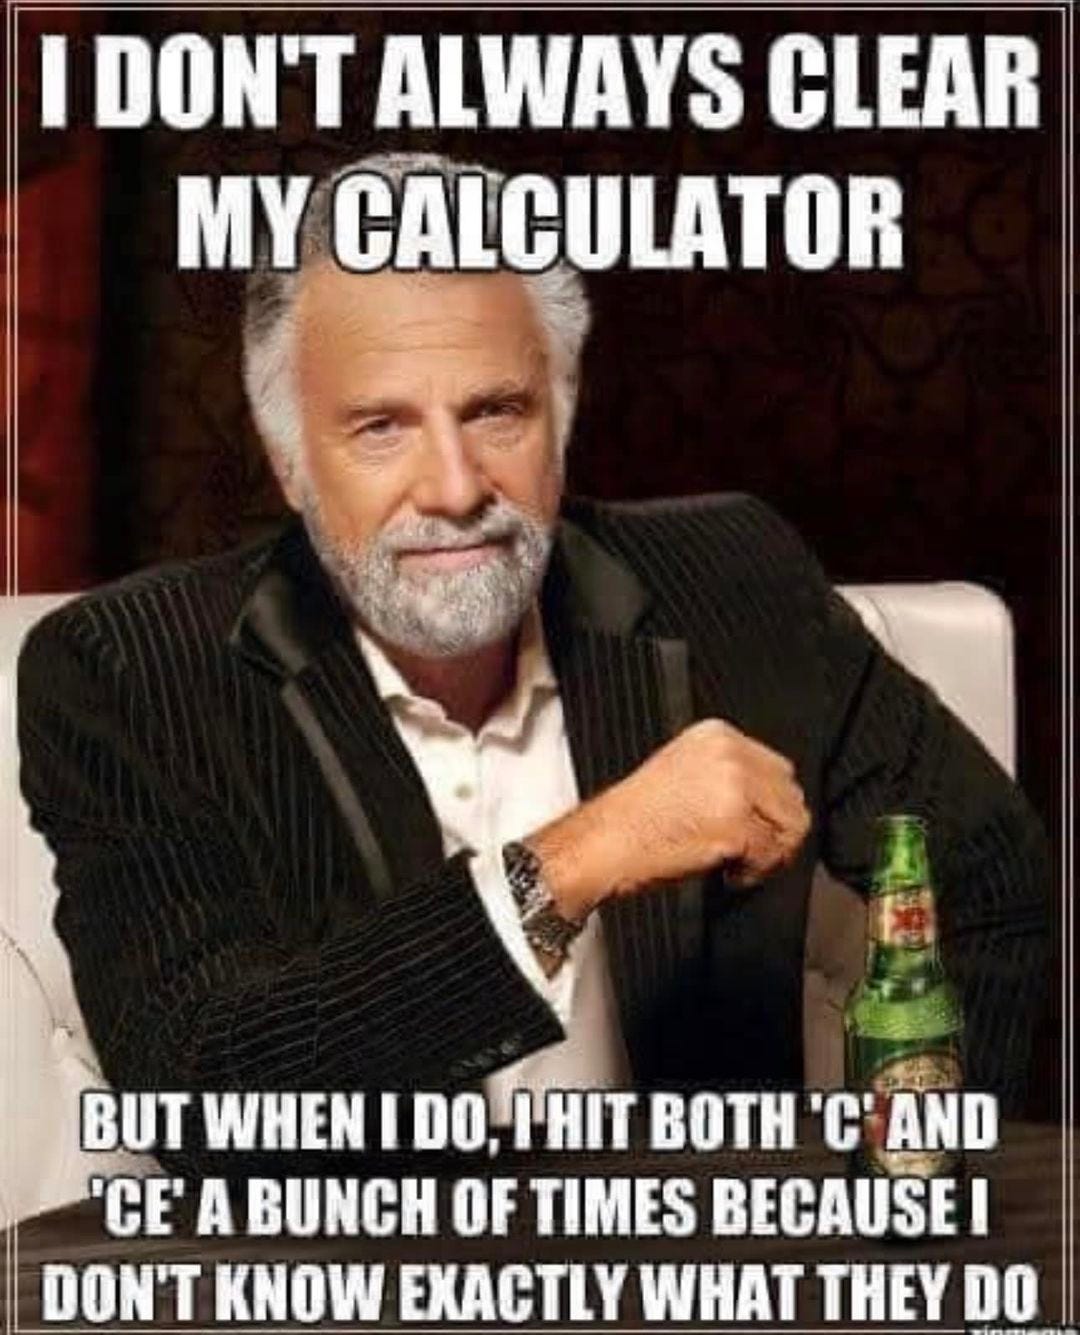 May be an image of 1 person and text that says 'I DON'T ALWAYS CLEAR MY CALCULATOR BUT WHEN I DO, LHIT BOTH 'C' AND 'CE A BUNCH OF TIMES BECAUSEI DON'T KNOW EXACTLY WHAT THEY DO'